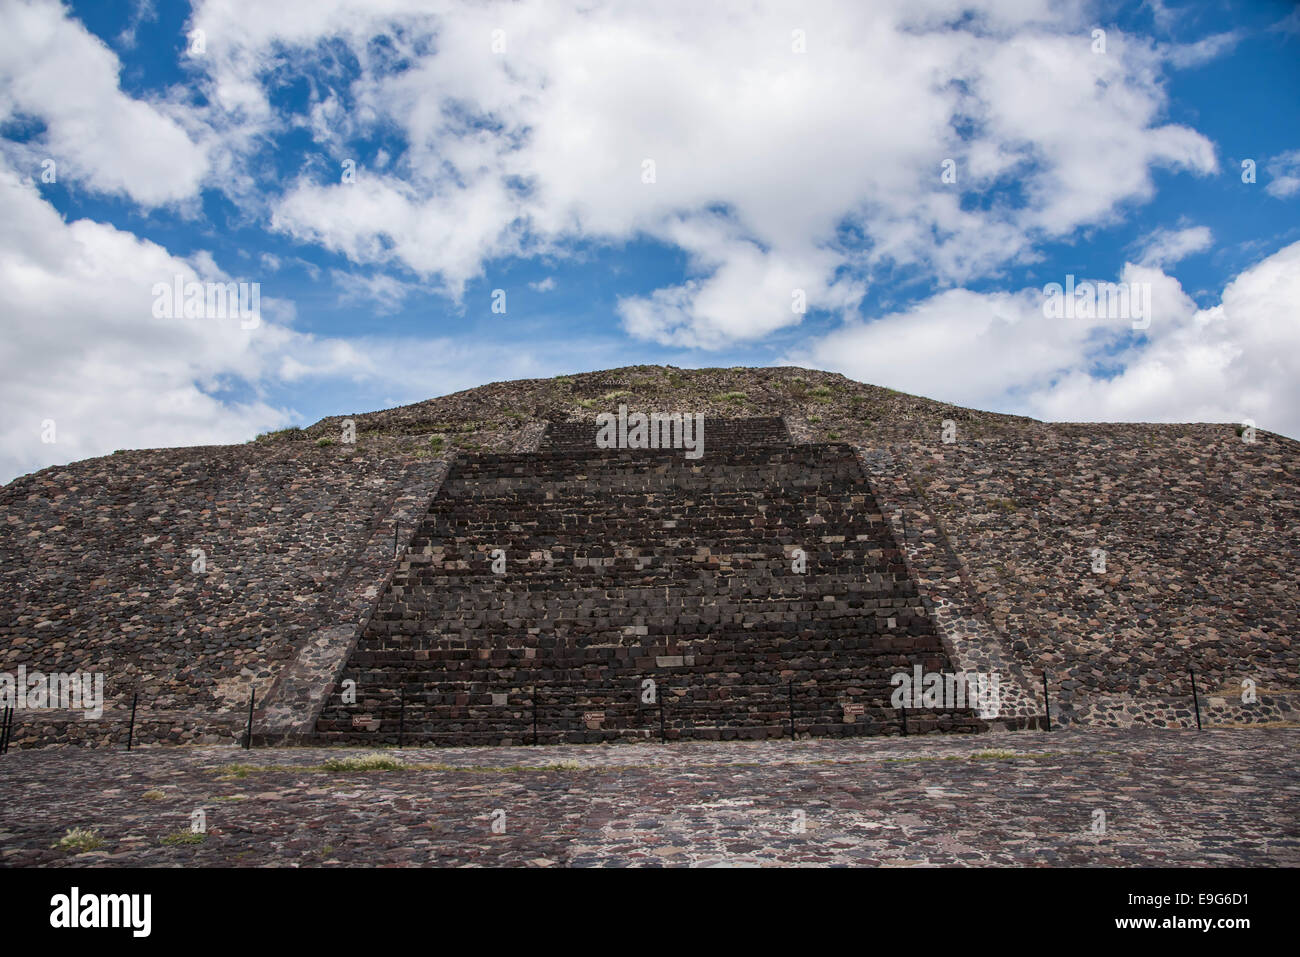 Pyramid of The Moon,Teotihuacan,Mexico Stock Photo